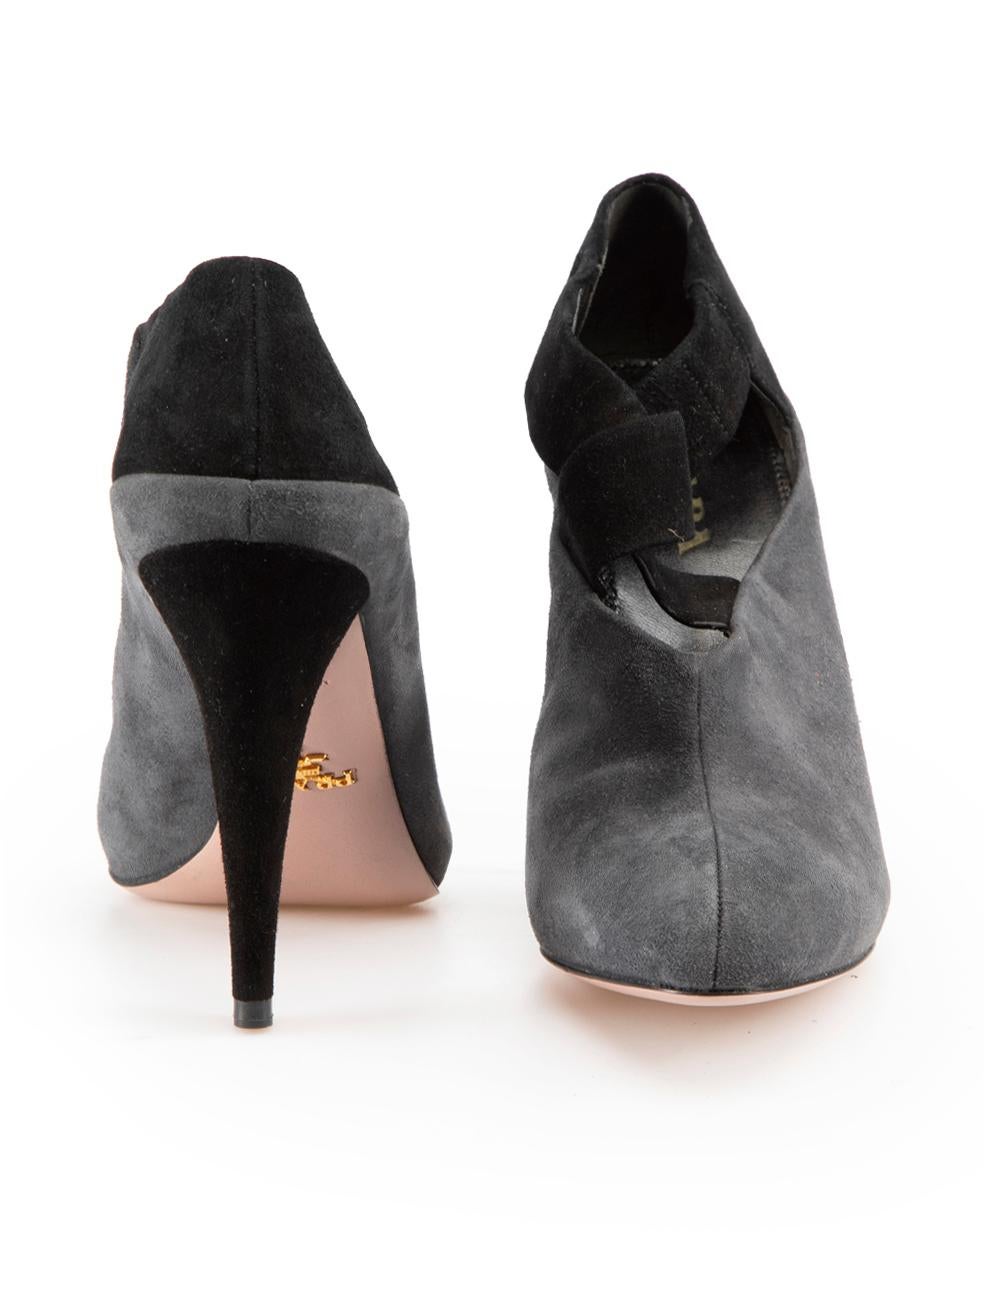 Prada Grey Suede Heeled Ankle Boots Size IT 35 In Excellent Condition For Sale In London, GB